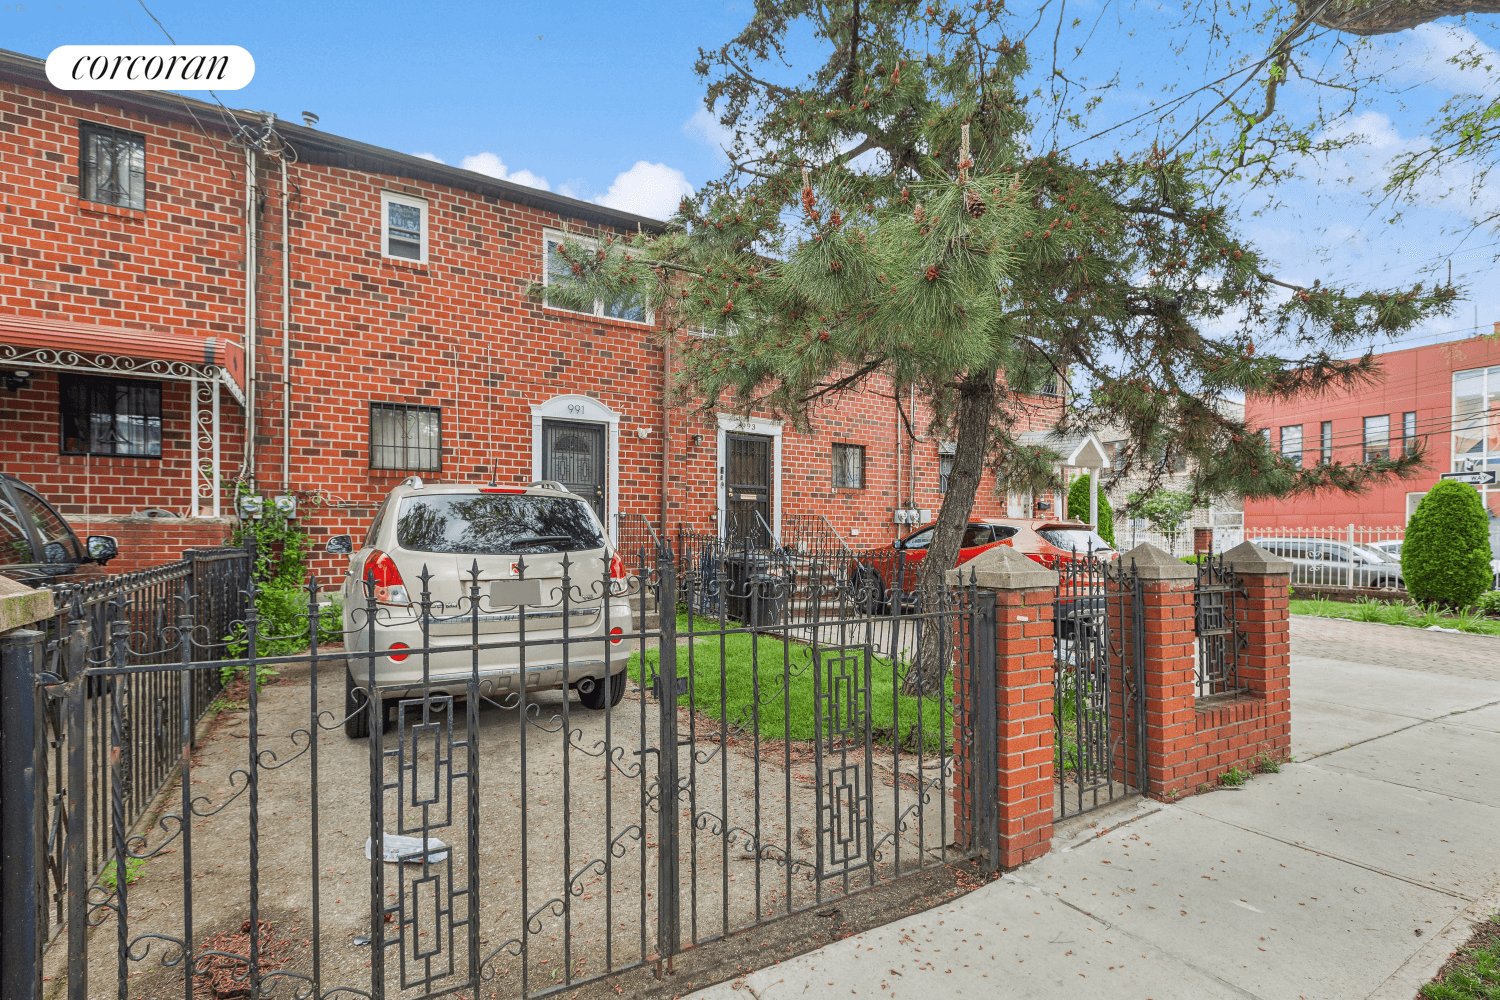 991 Blake Avenue is a modern single family townhouse on a neighborly block in East New York.